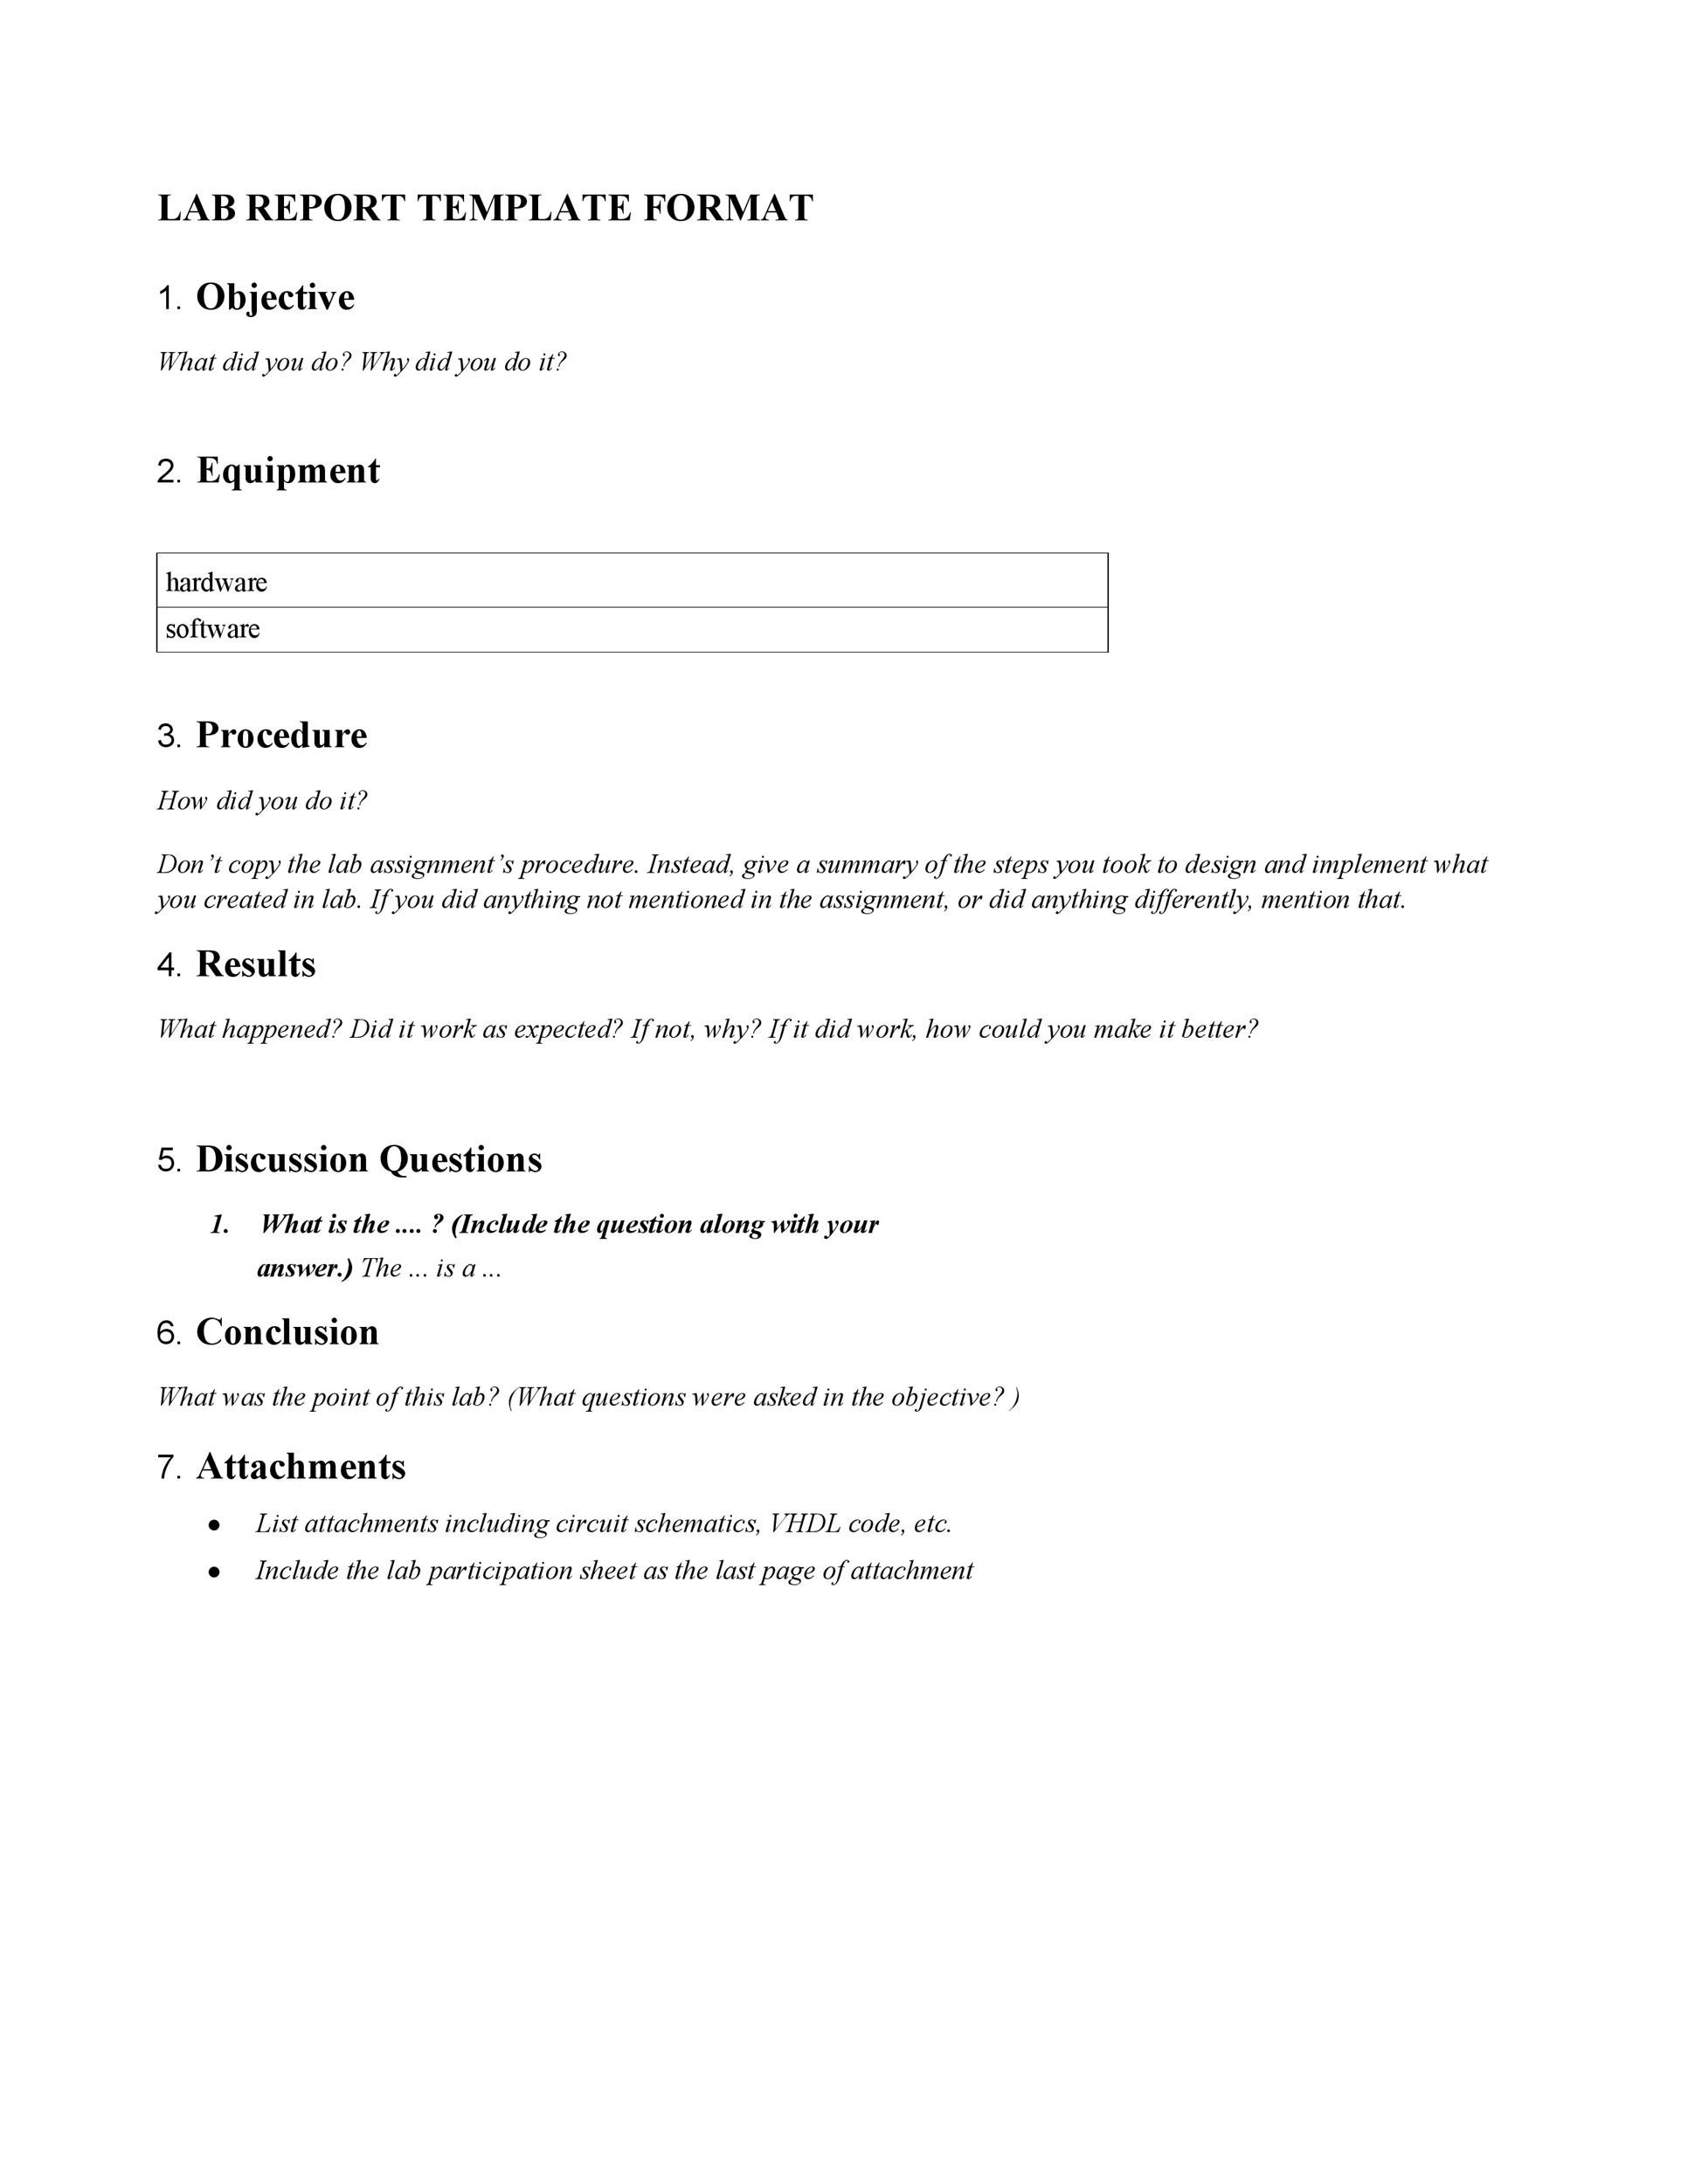 ➤Order To Write A Lab Report, Best Online Custom Writing Service For Lab Report Conclusion Template